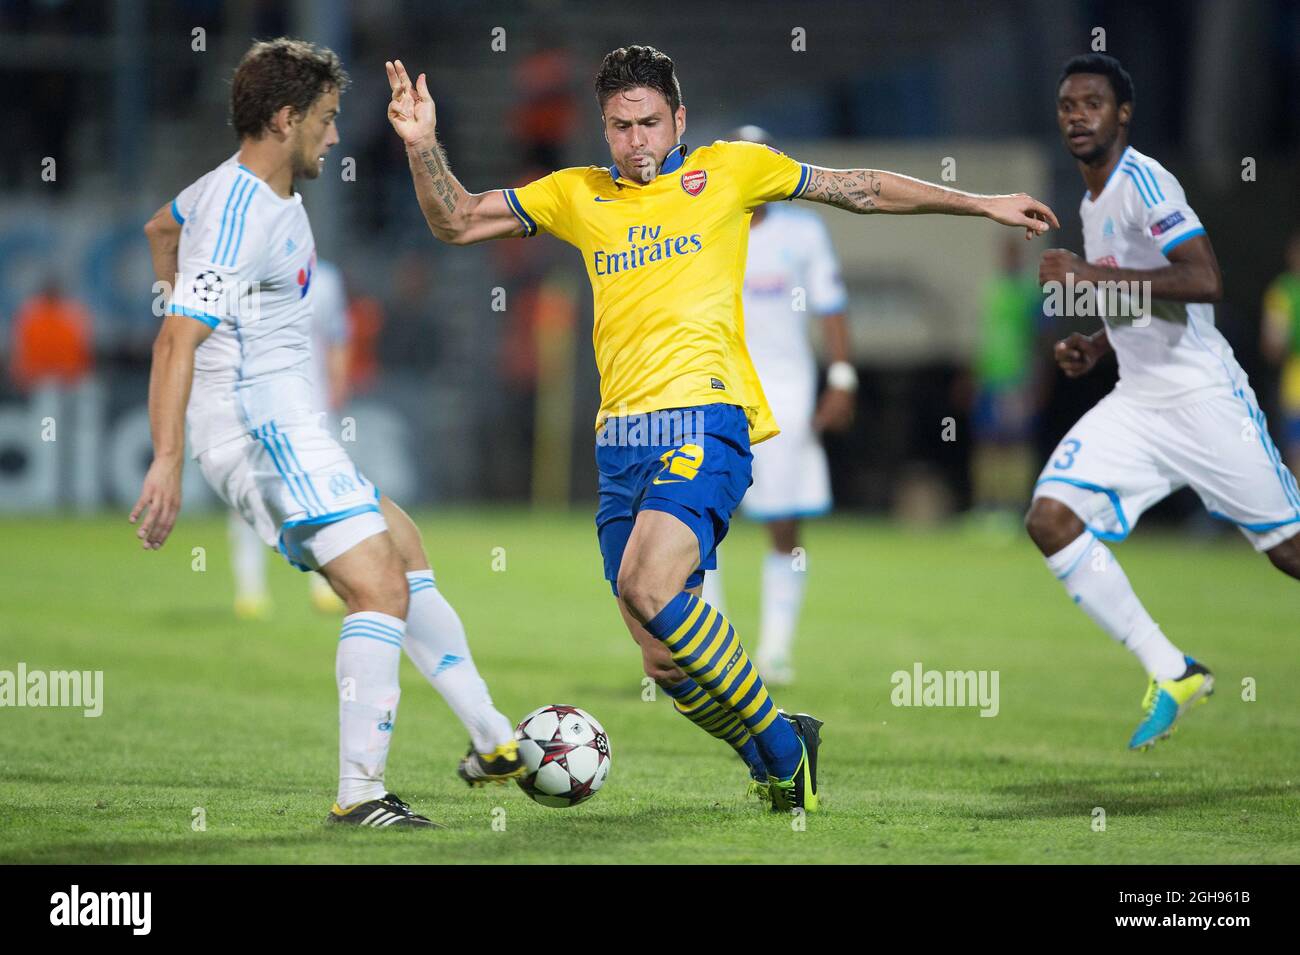 Arsenal's Olivier Giroud in action during the UEFA Champions&#8217; League Group F match between Olympique de Marseille and Arsenal FC at Stade Velodrome Stadium in Marseille, France, on Sept. 18, 2013. Stock Photo